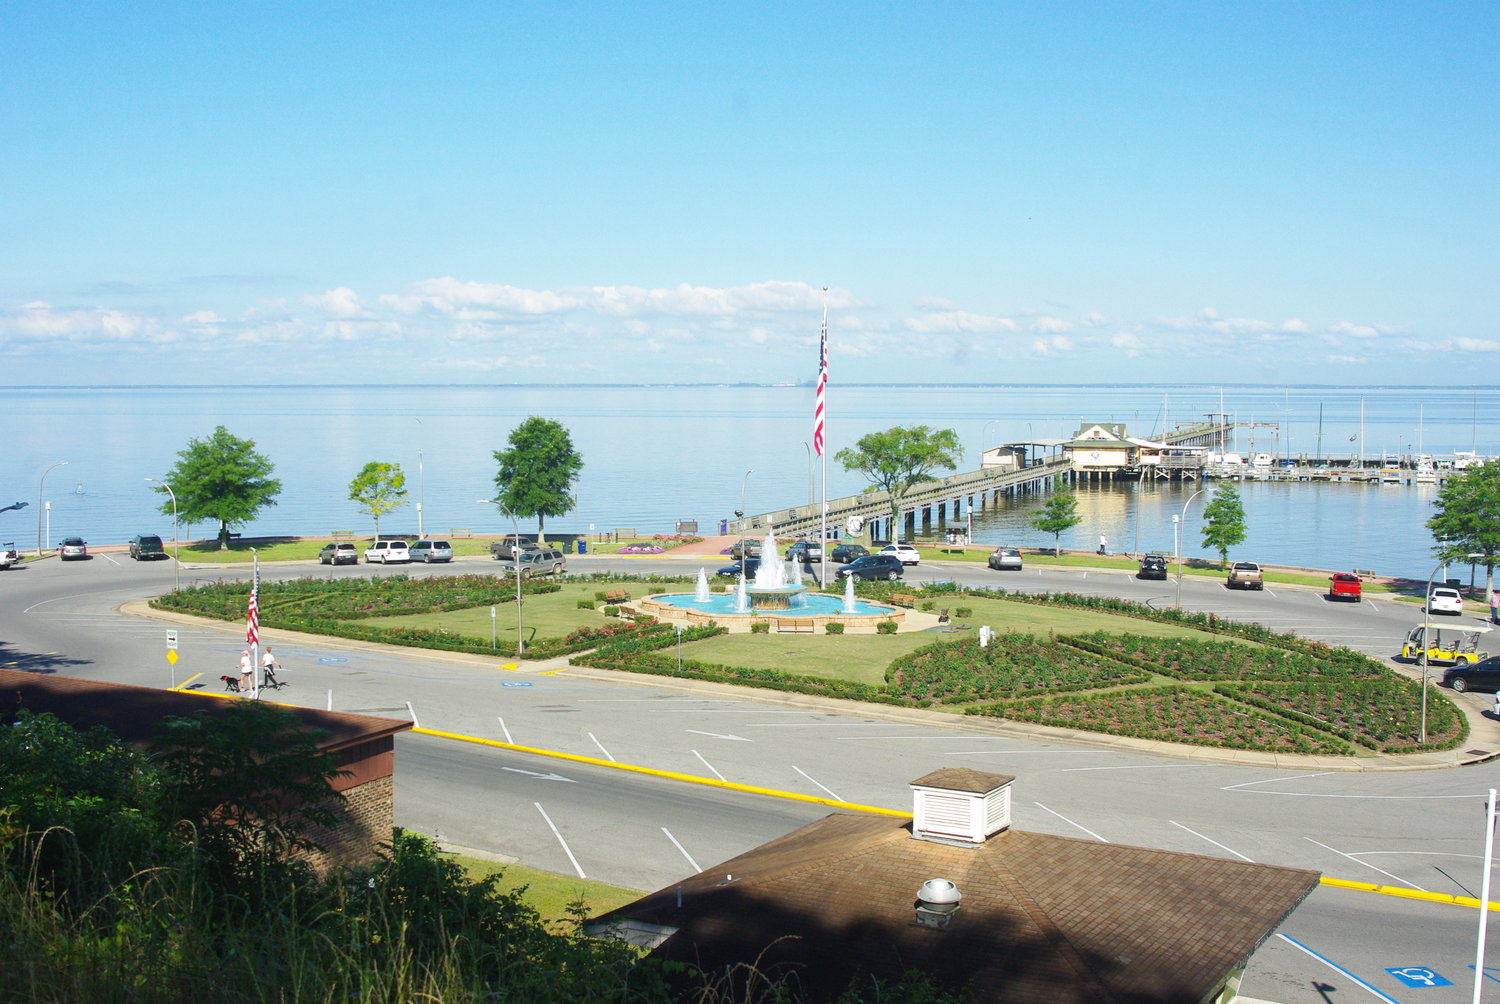 Improvements are planned for the Fairhope Pier, bluffs and beach area park.